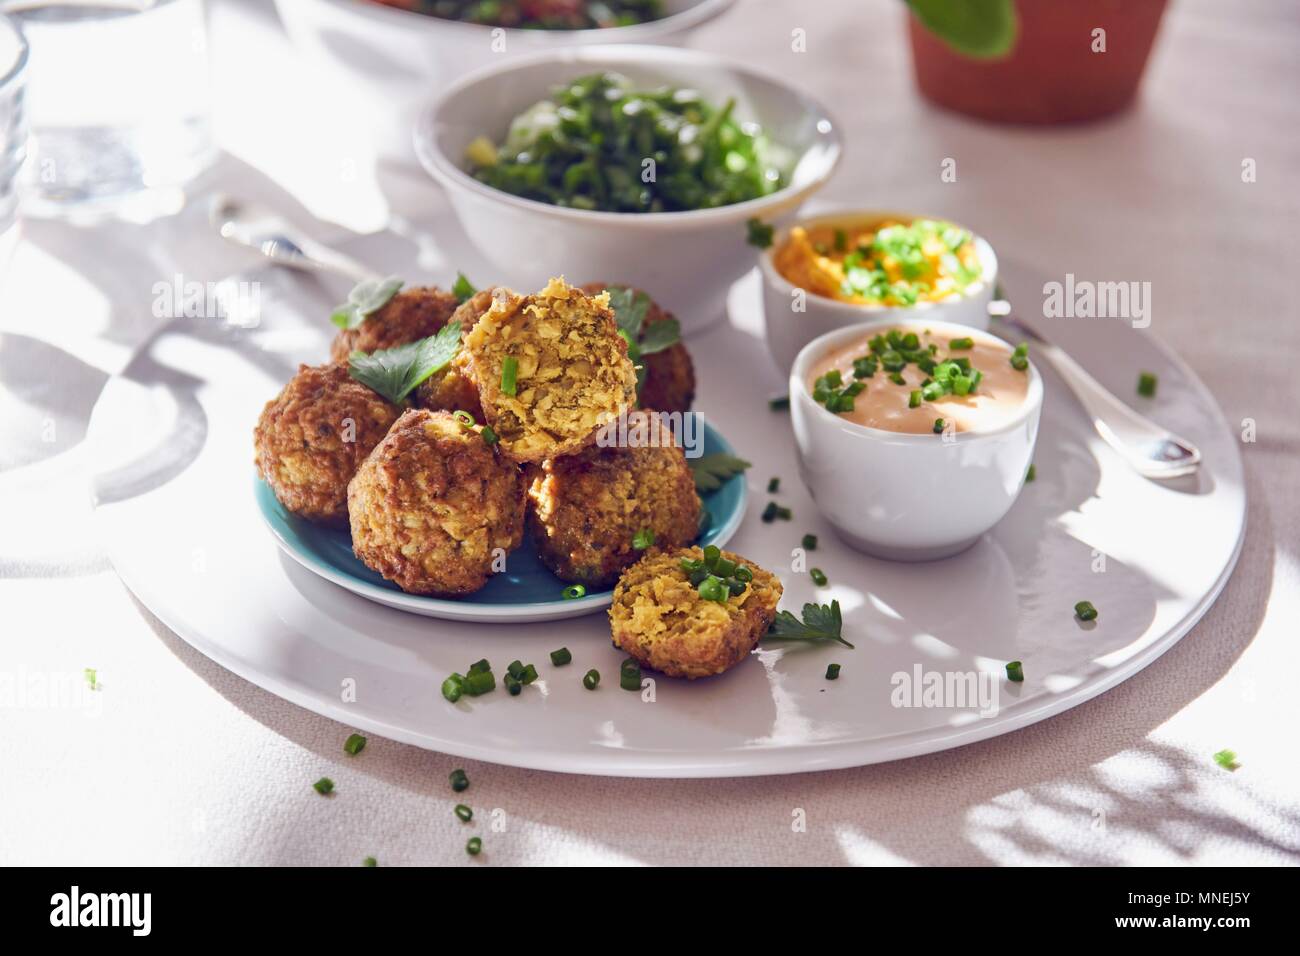 Falafel with dips Stock Photo